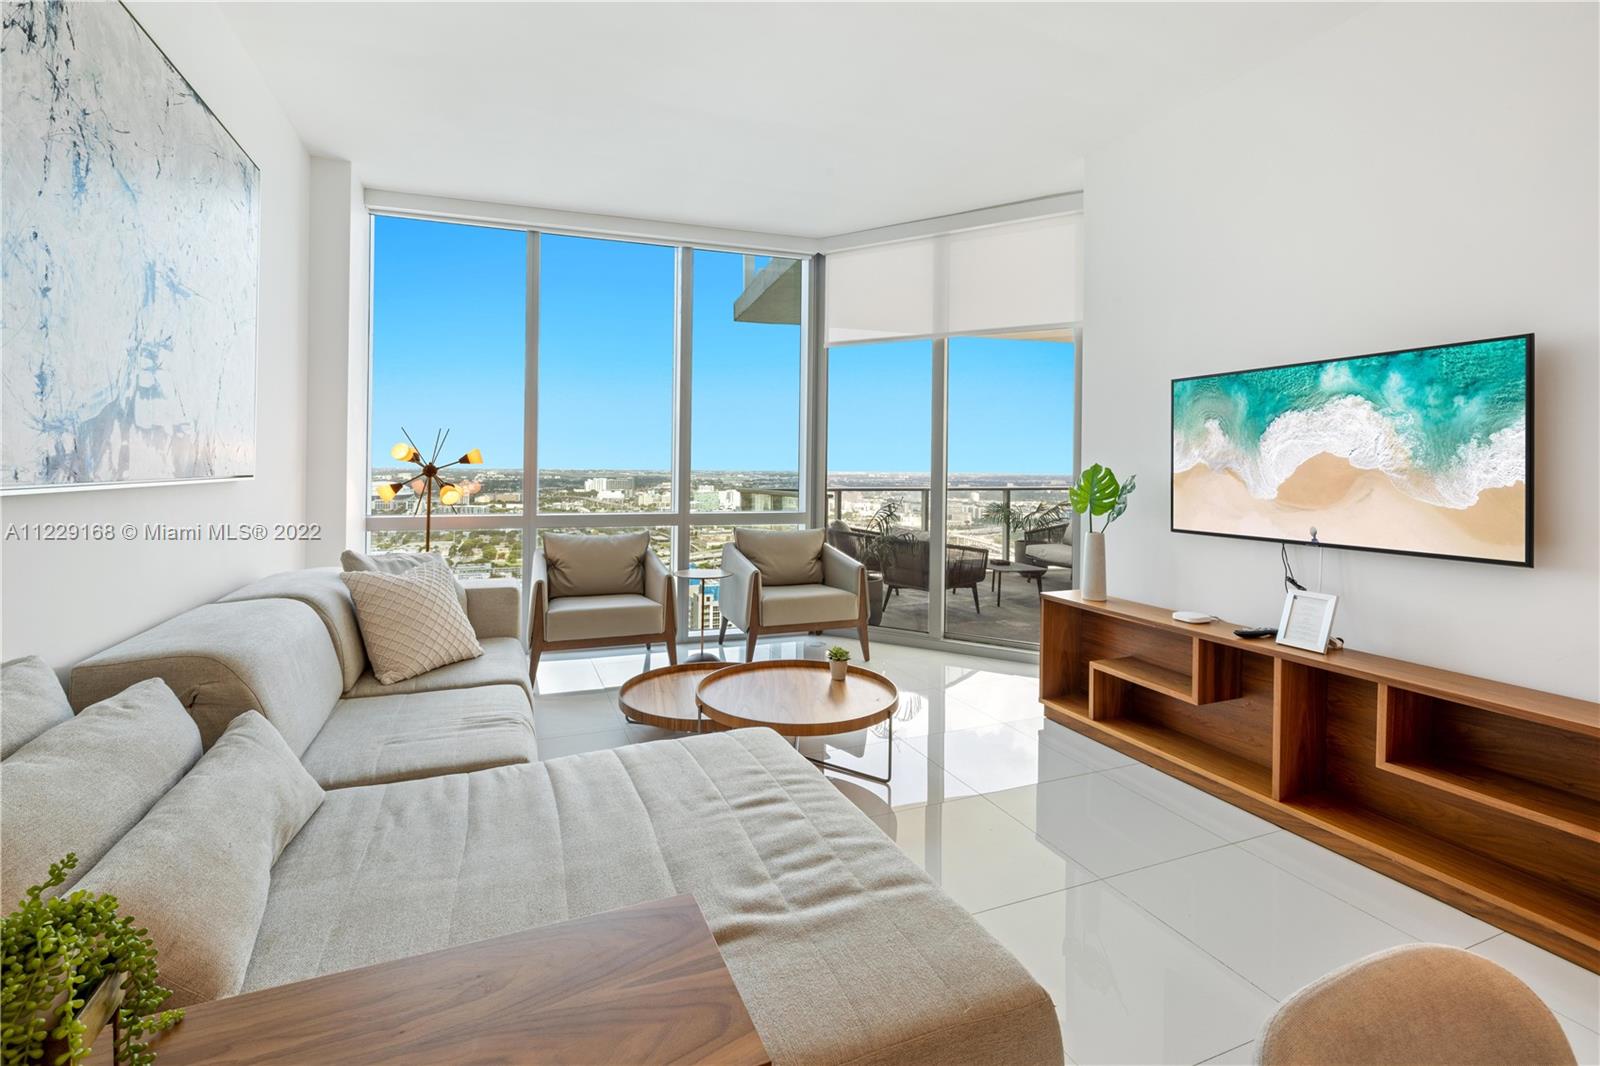 Live in one of the best areas of Miami in this super cool 1 bed plus den beautifully furnished. High end new building offers all amenities you can desire.